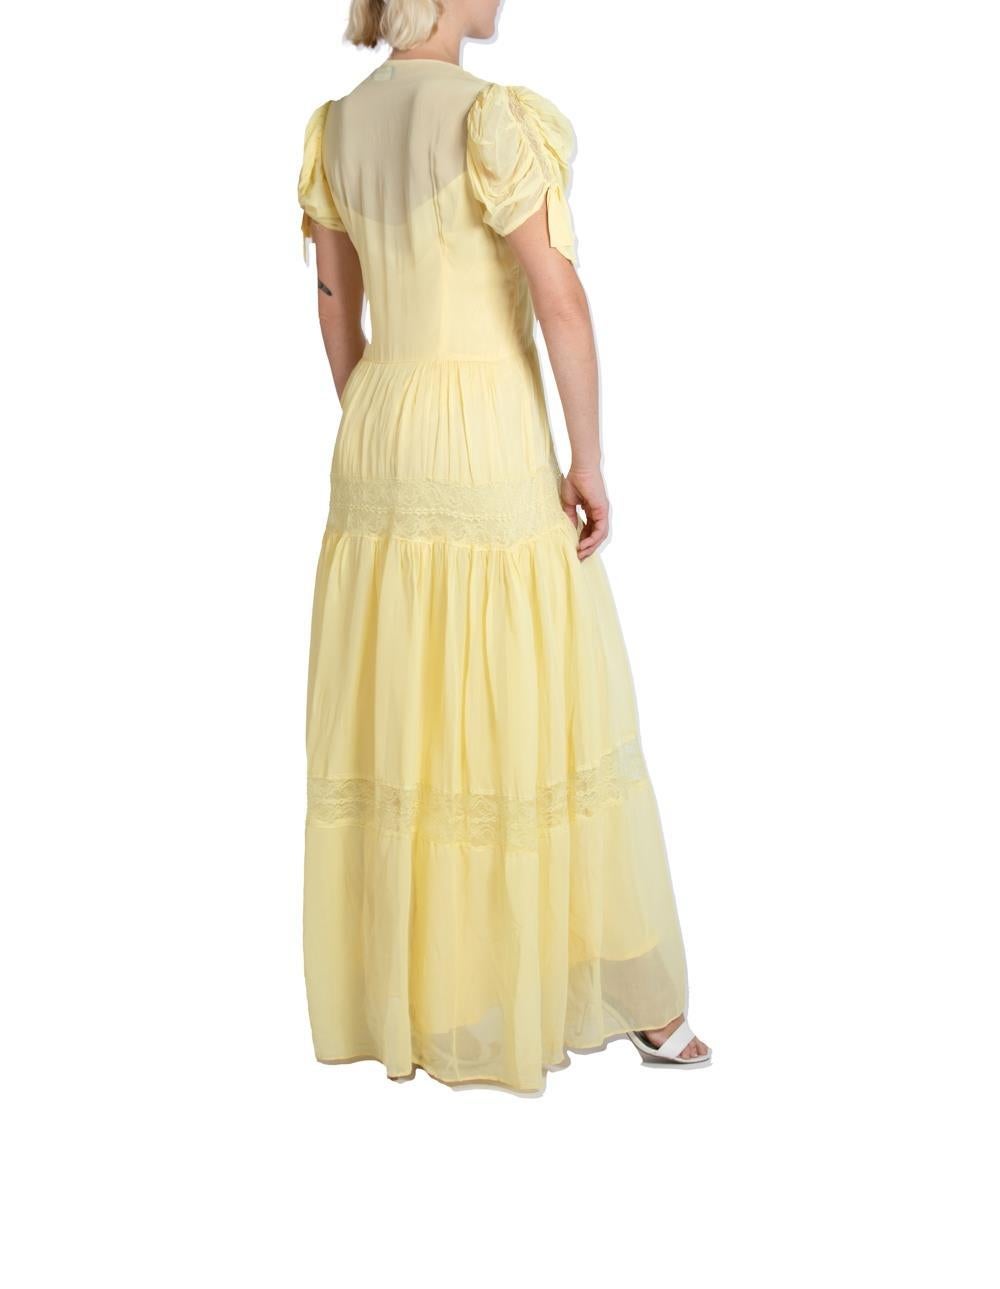 1940S Yellow Chiffon Gown With Tiers Of Lace Trim For Sale 3